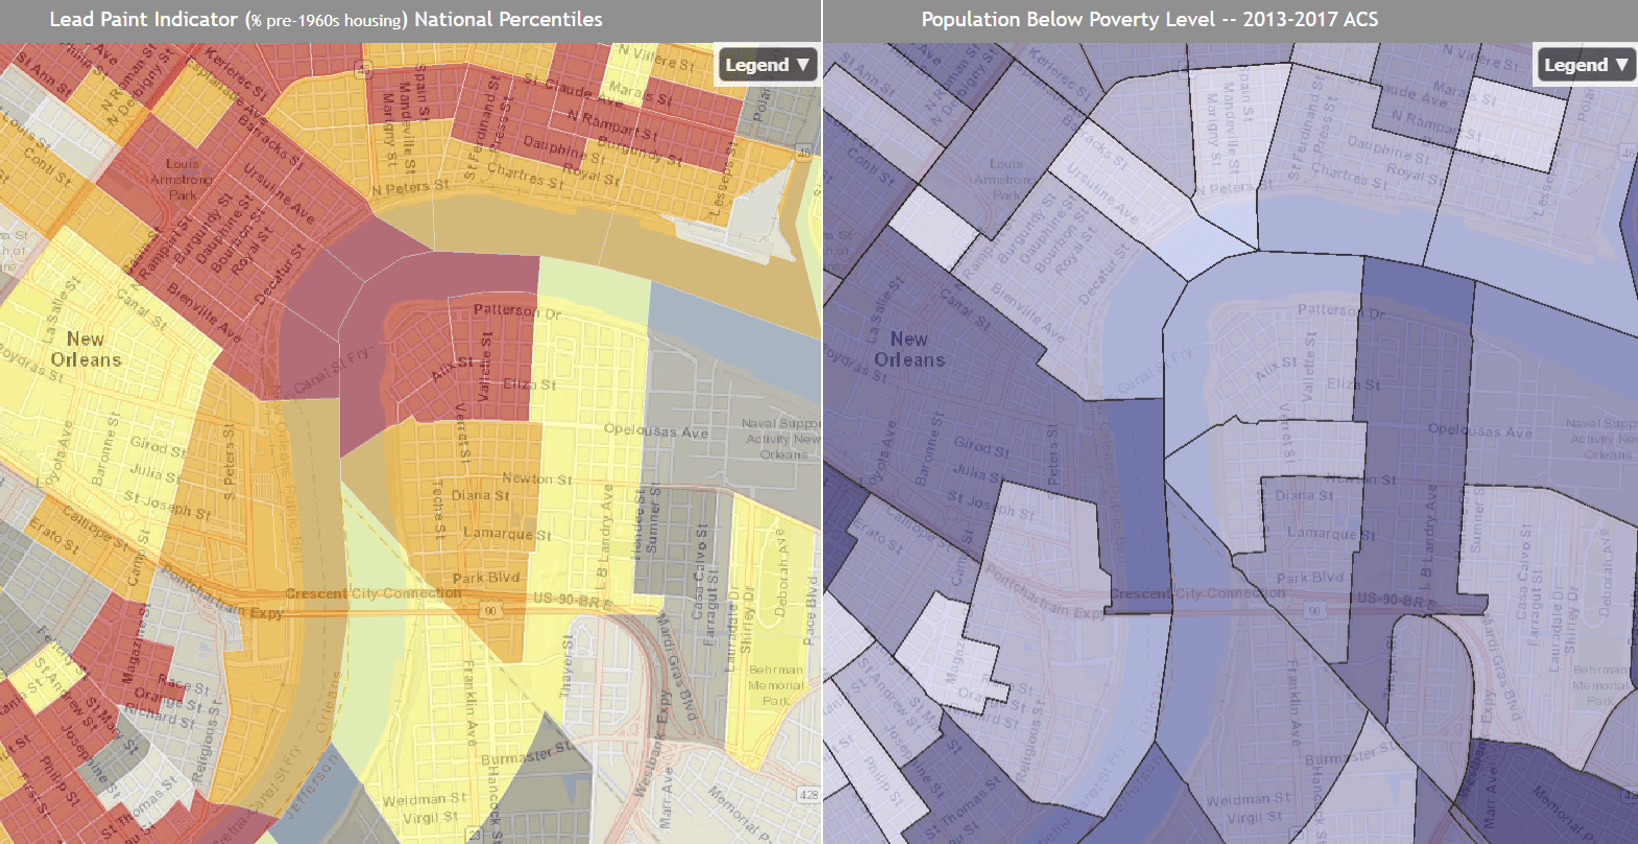 These maps show the percent of homes with lead paint (left) and the percent of the population below the poverty level (right) in New Orleans neighborhoods. The darker shades indicate more households with lead paint and more households living in poverty, respectively.